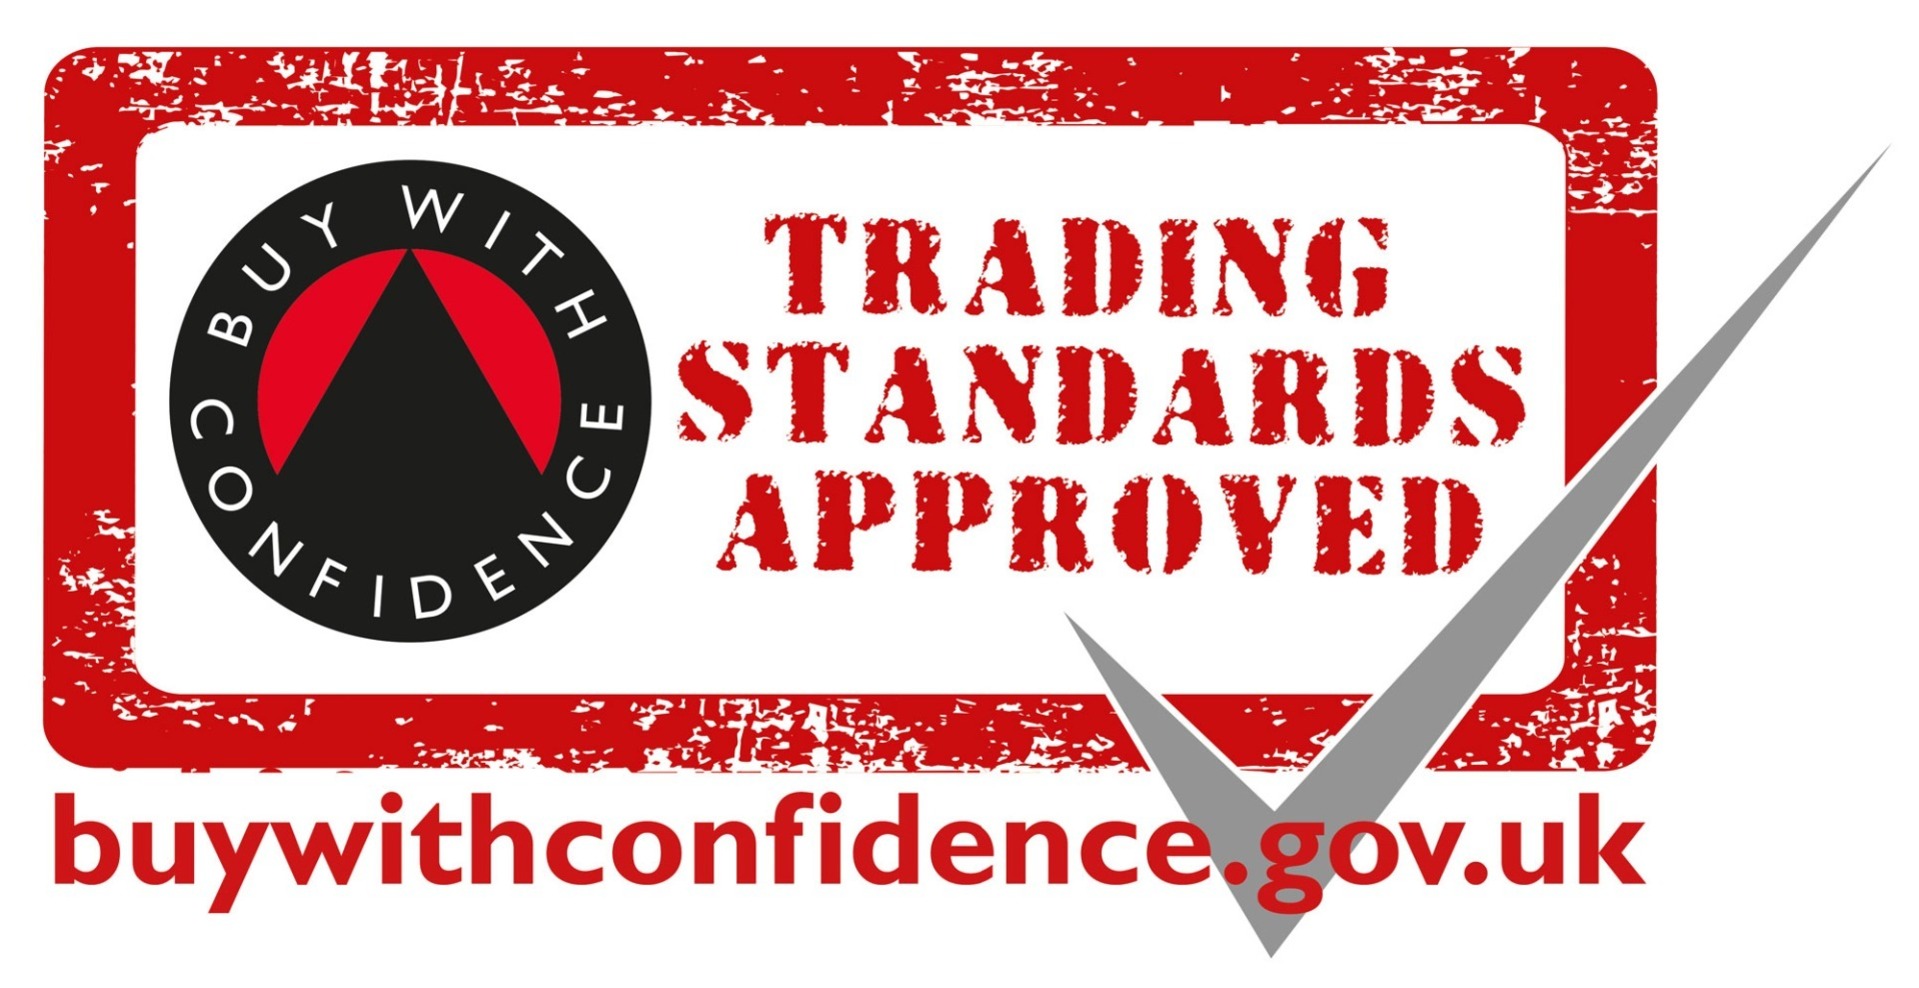 buy with confidence - trading standards approved logo